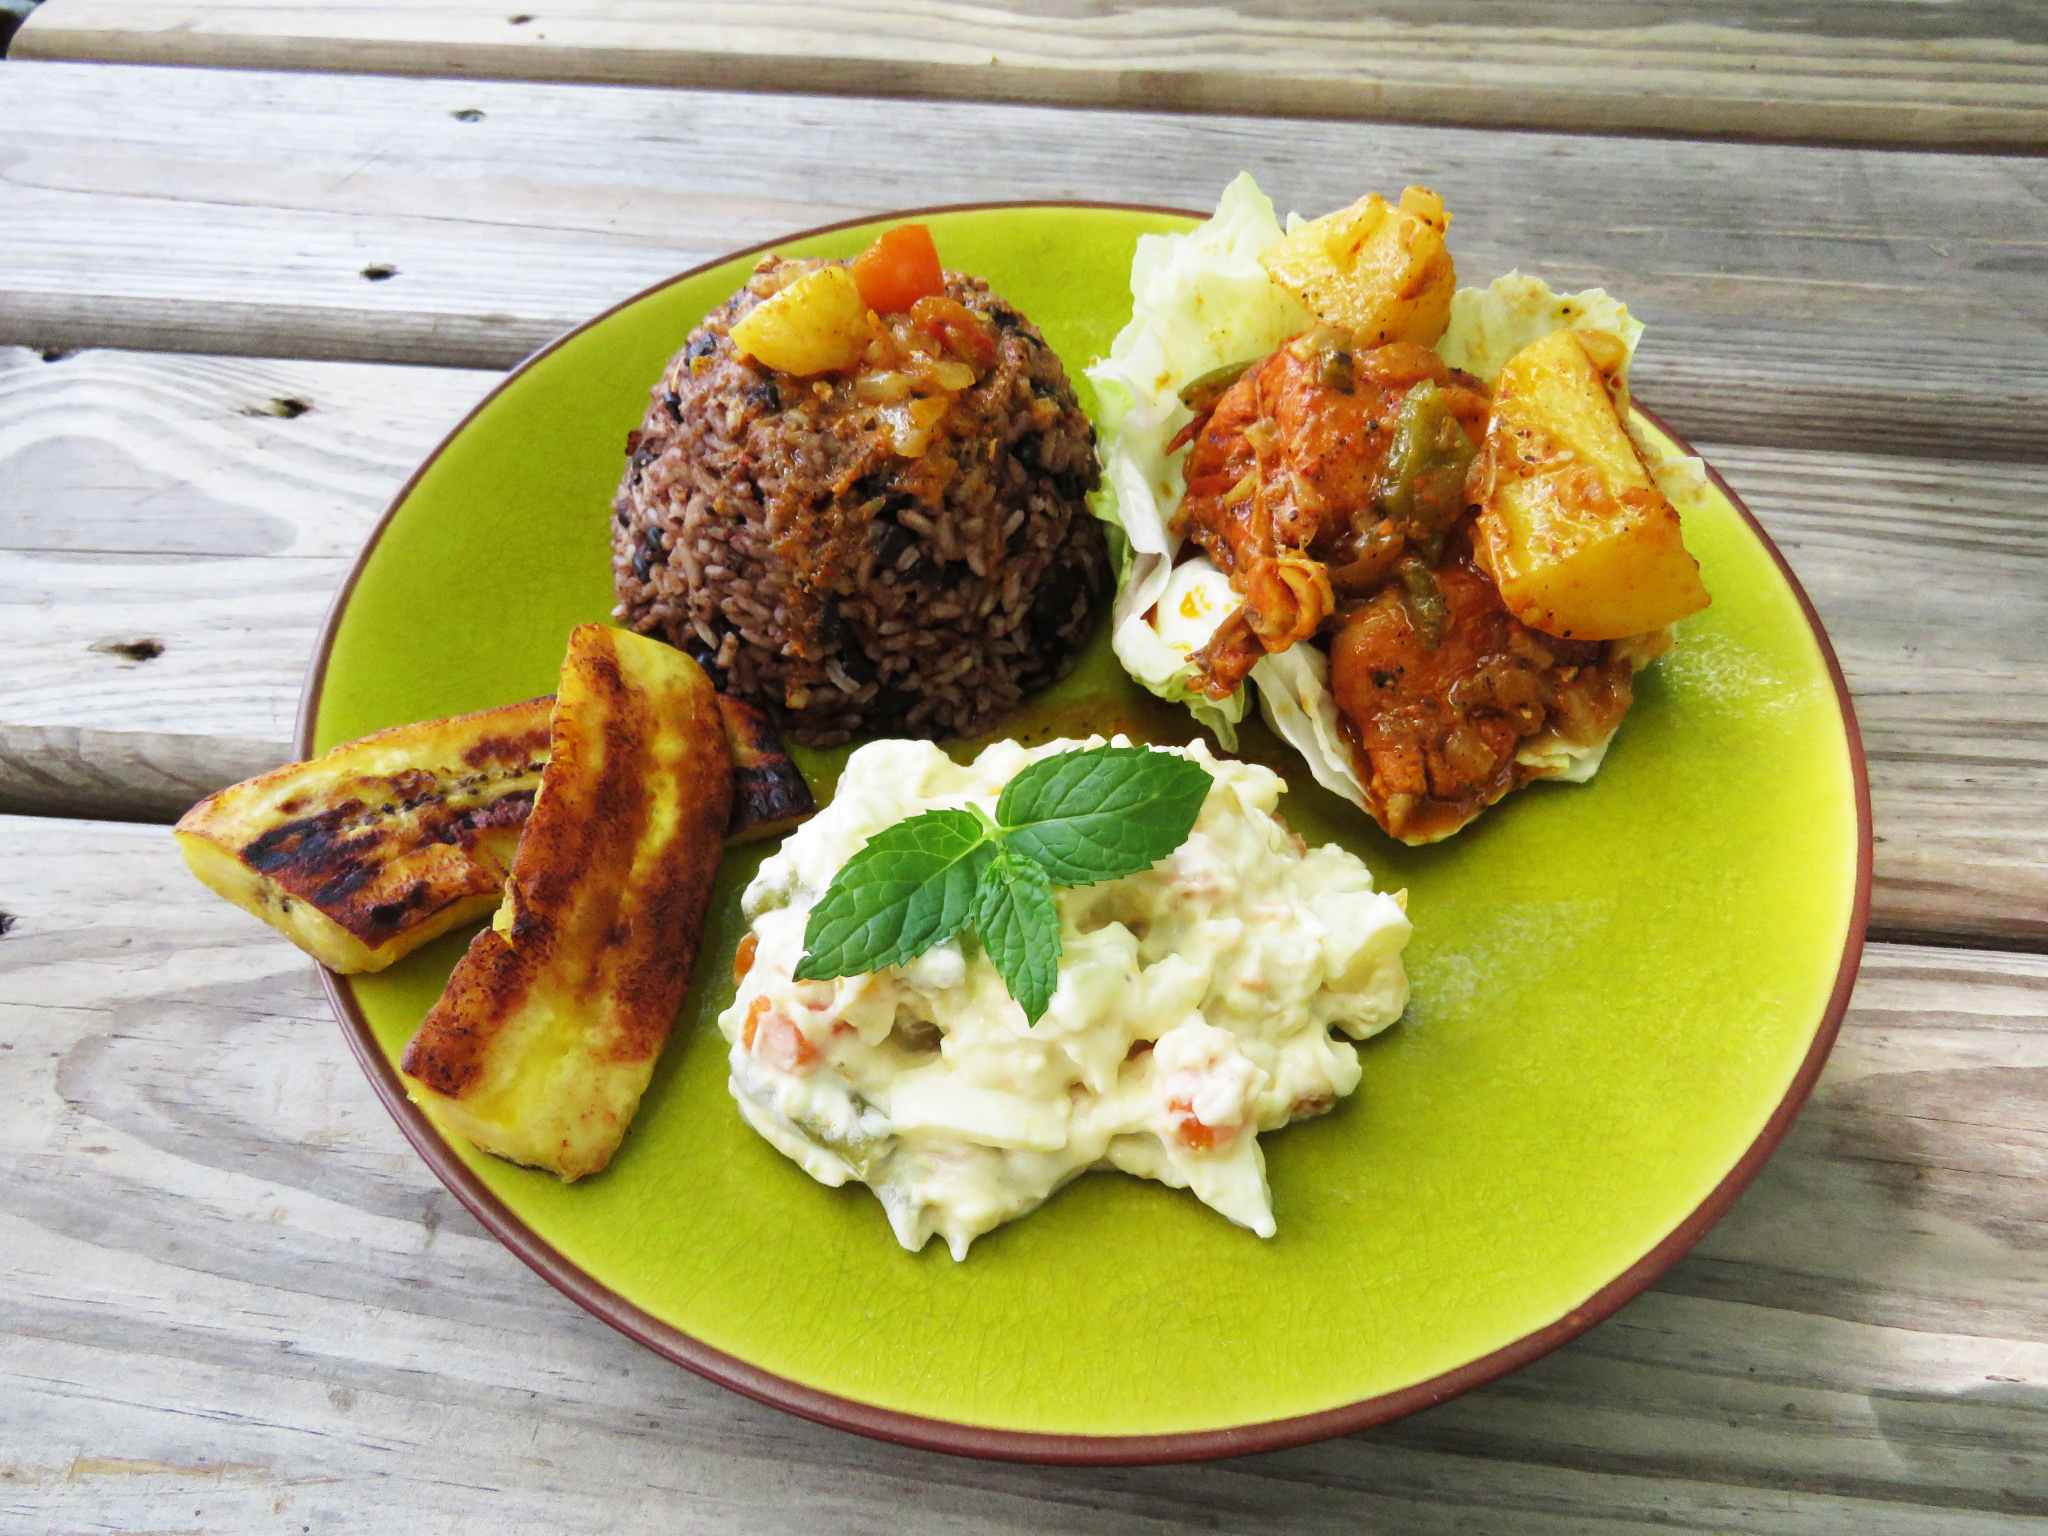 Belizean meals served daily family style.